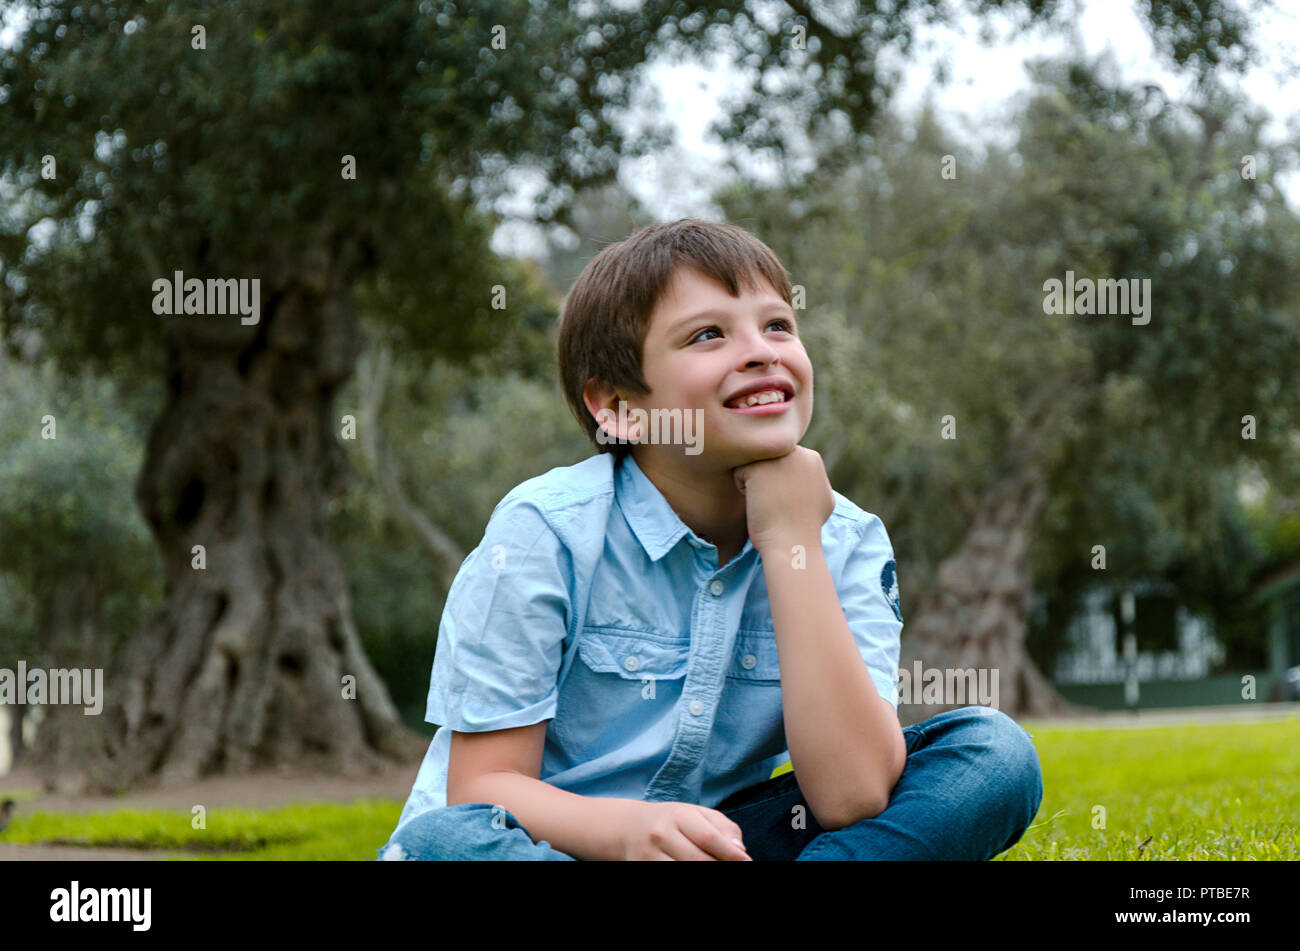 Cute little boy sitting in the park smiling thinking about something Stock Photo